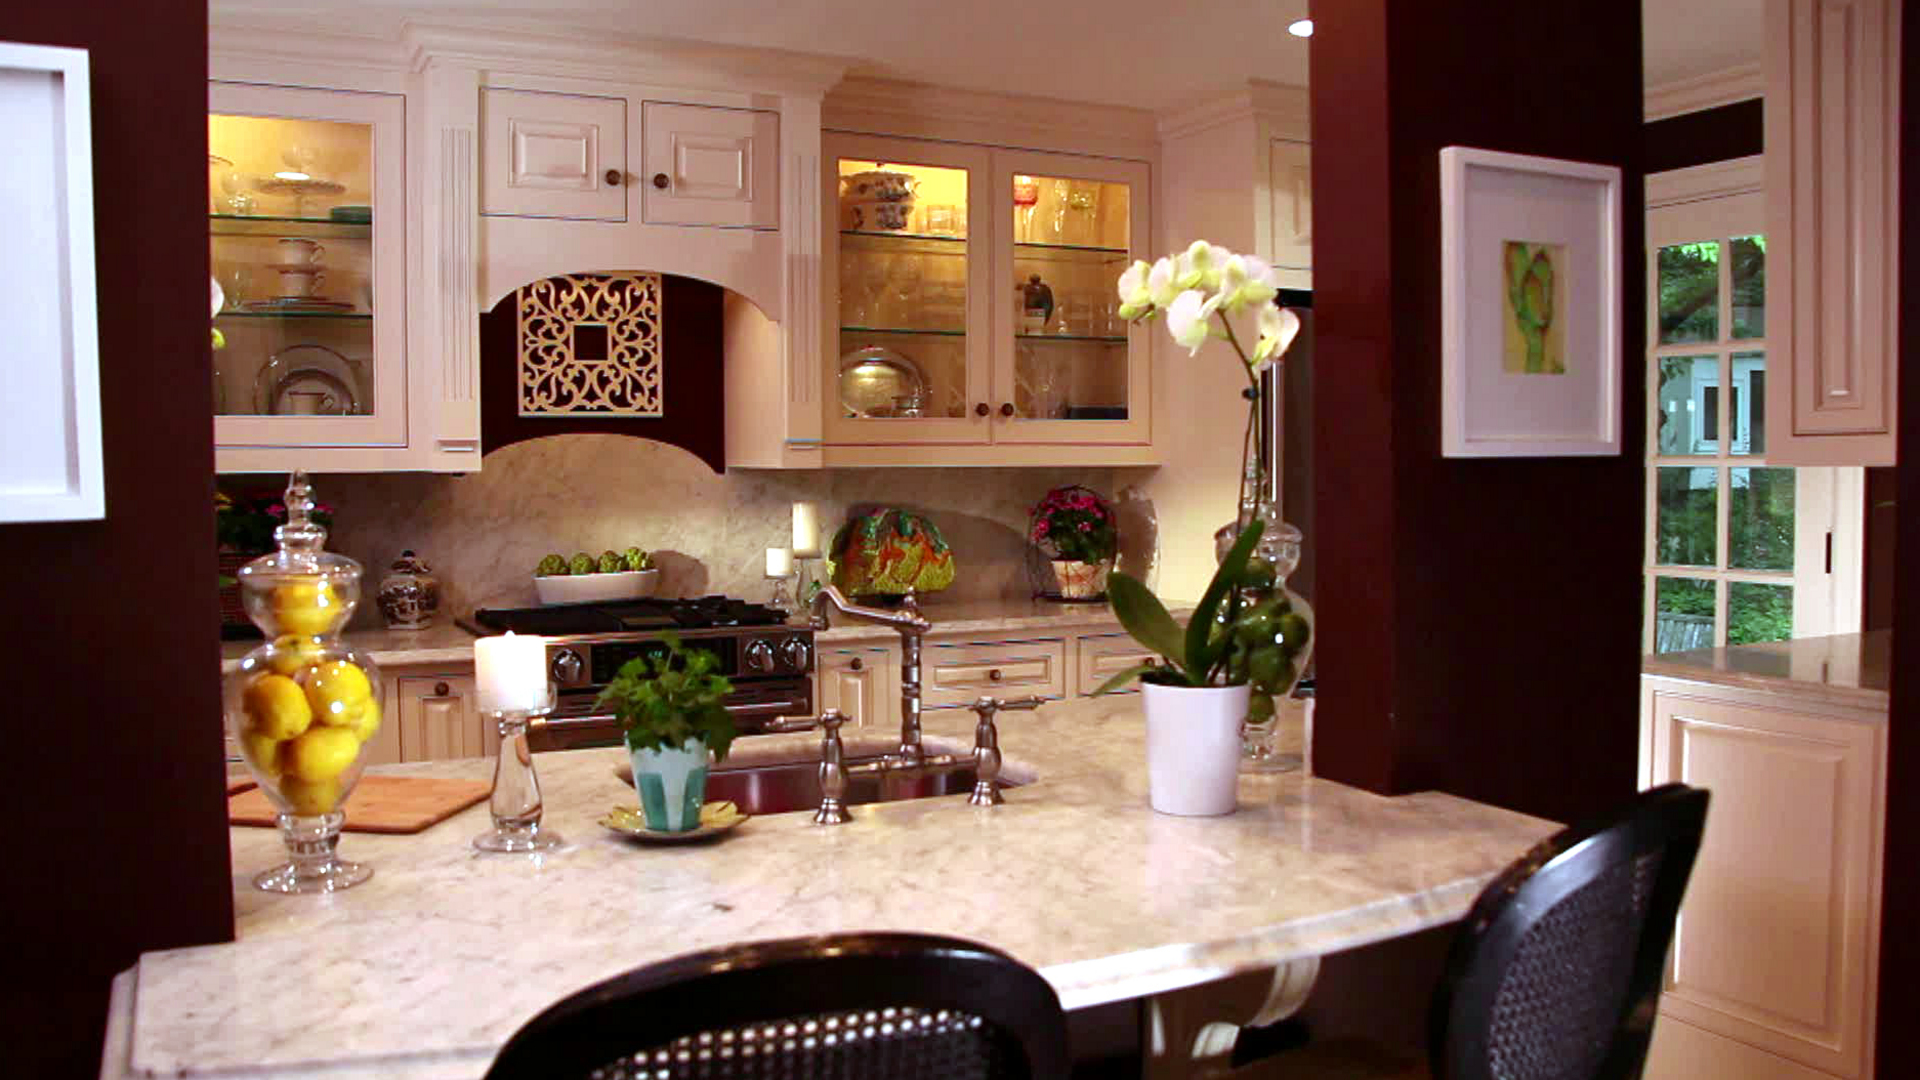 Painting Kitchen Countertops Pictures & Ideas From HGTV   HGTV